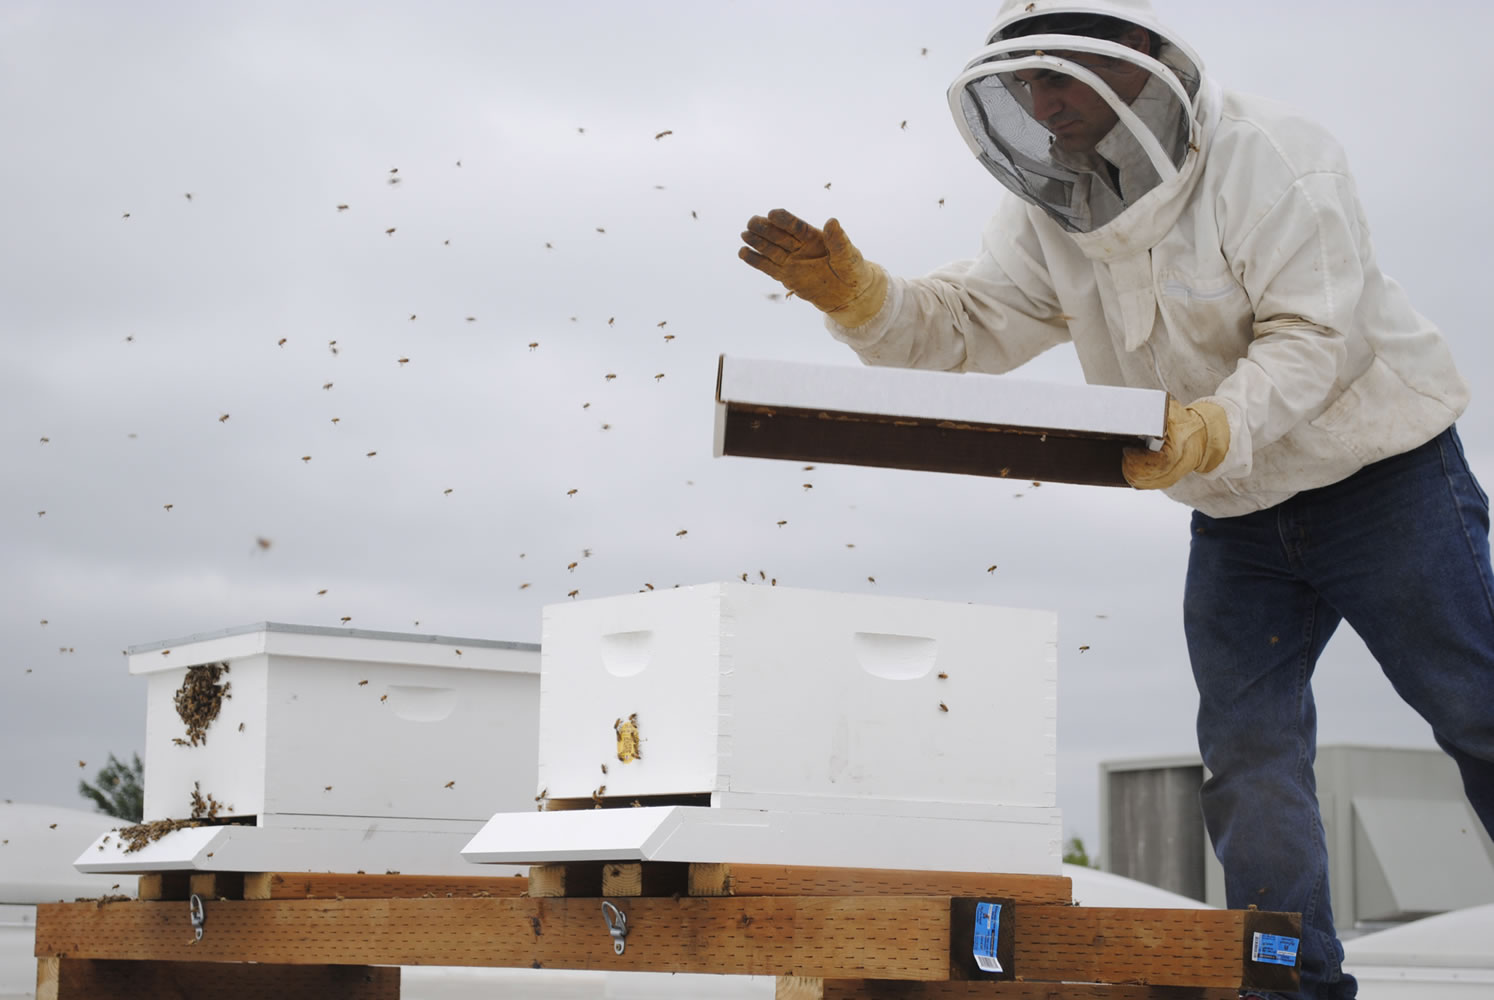 Portland beekeeper Damian Magista taps a container on July 8 to persuade thousands of honey bees to enter their new home on the roof of the Fisher's Landing New Seasons Market.